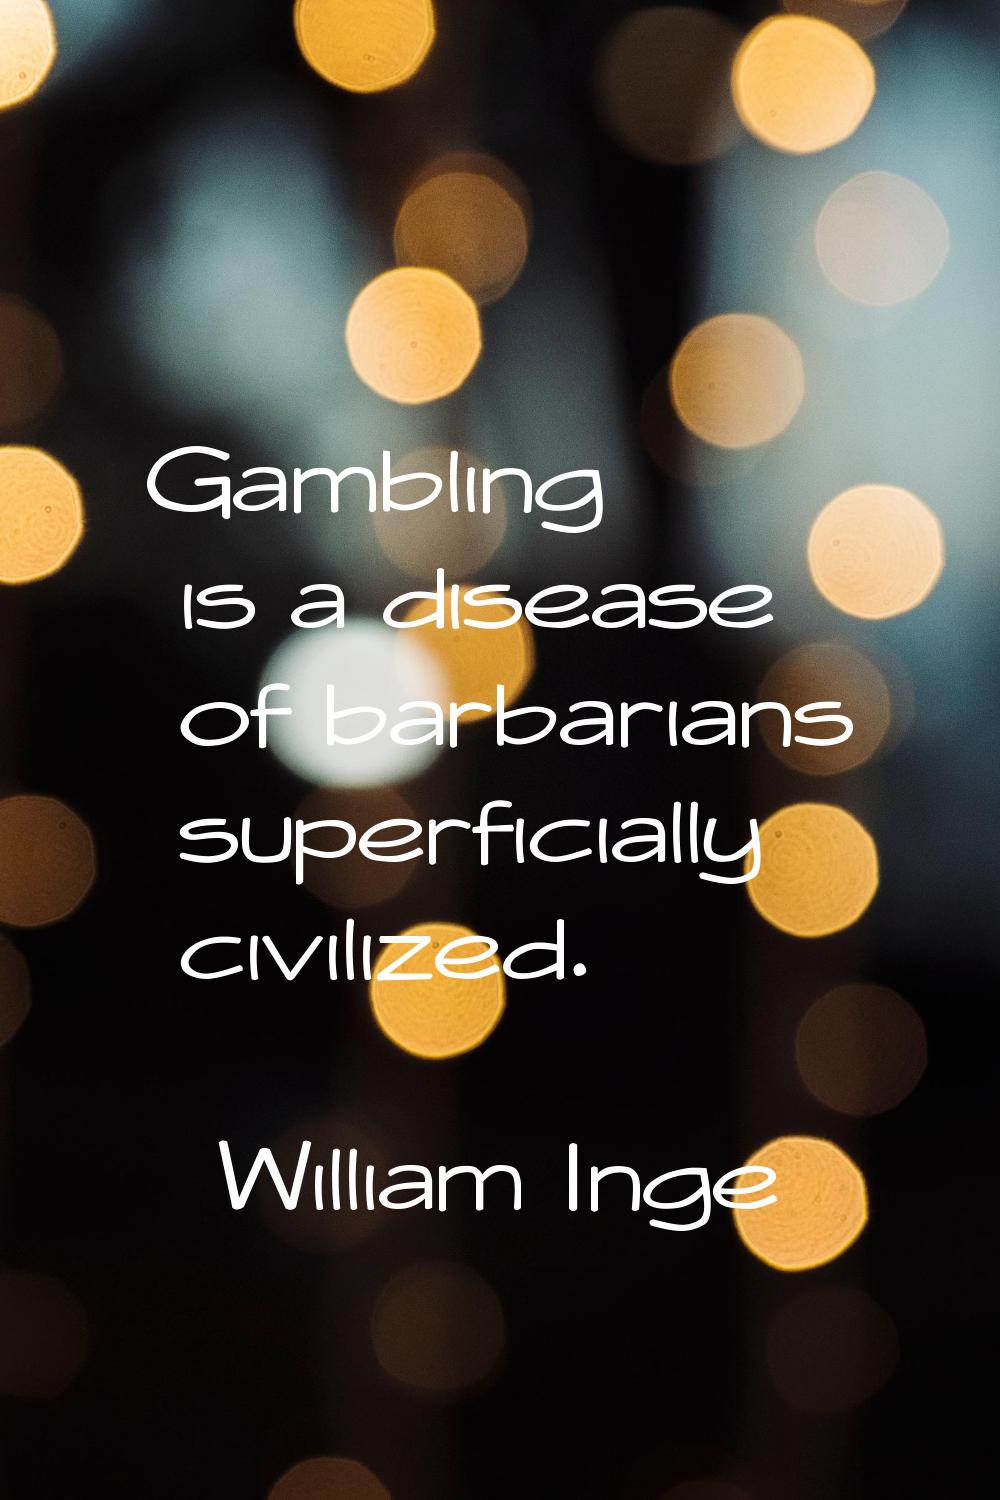 Gambling is a disease of barbarians superficially civilized.